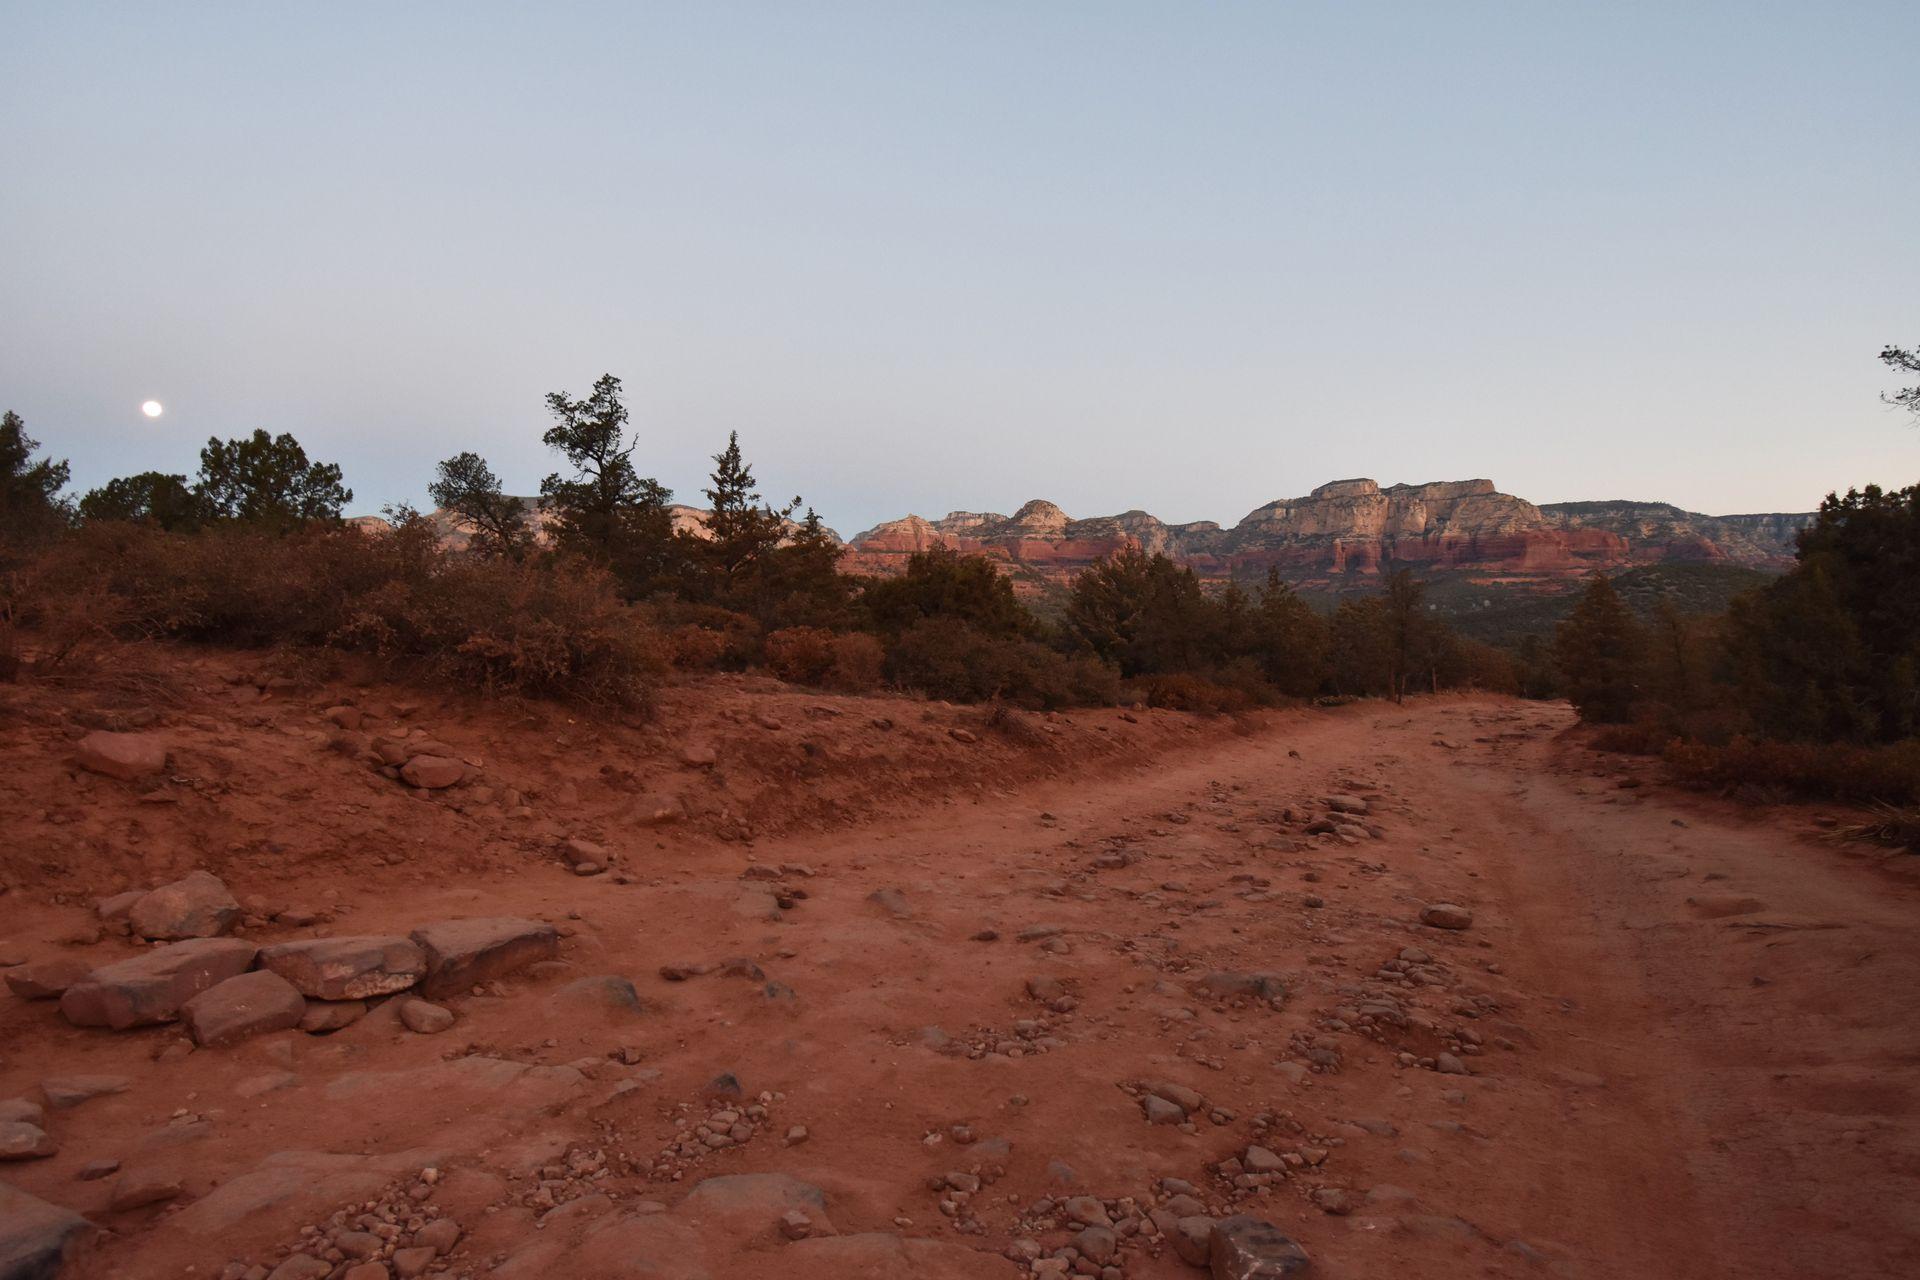 A wide, orange rock with rocks and dirt. There is a mountain in the distance and you can see the moon in the morning light.